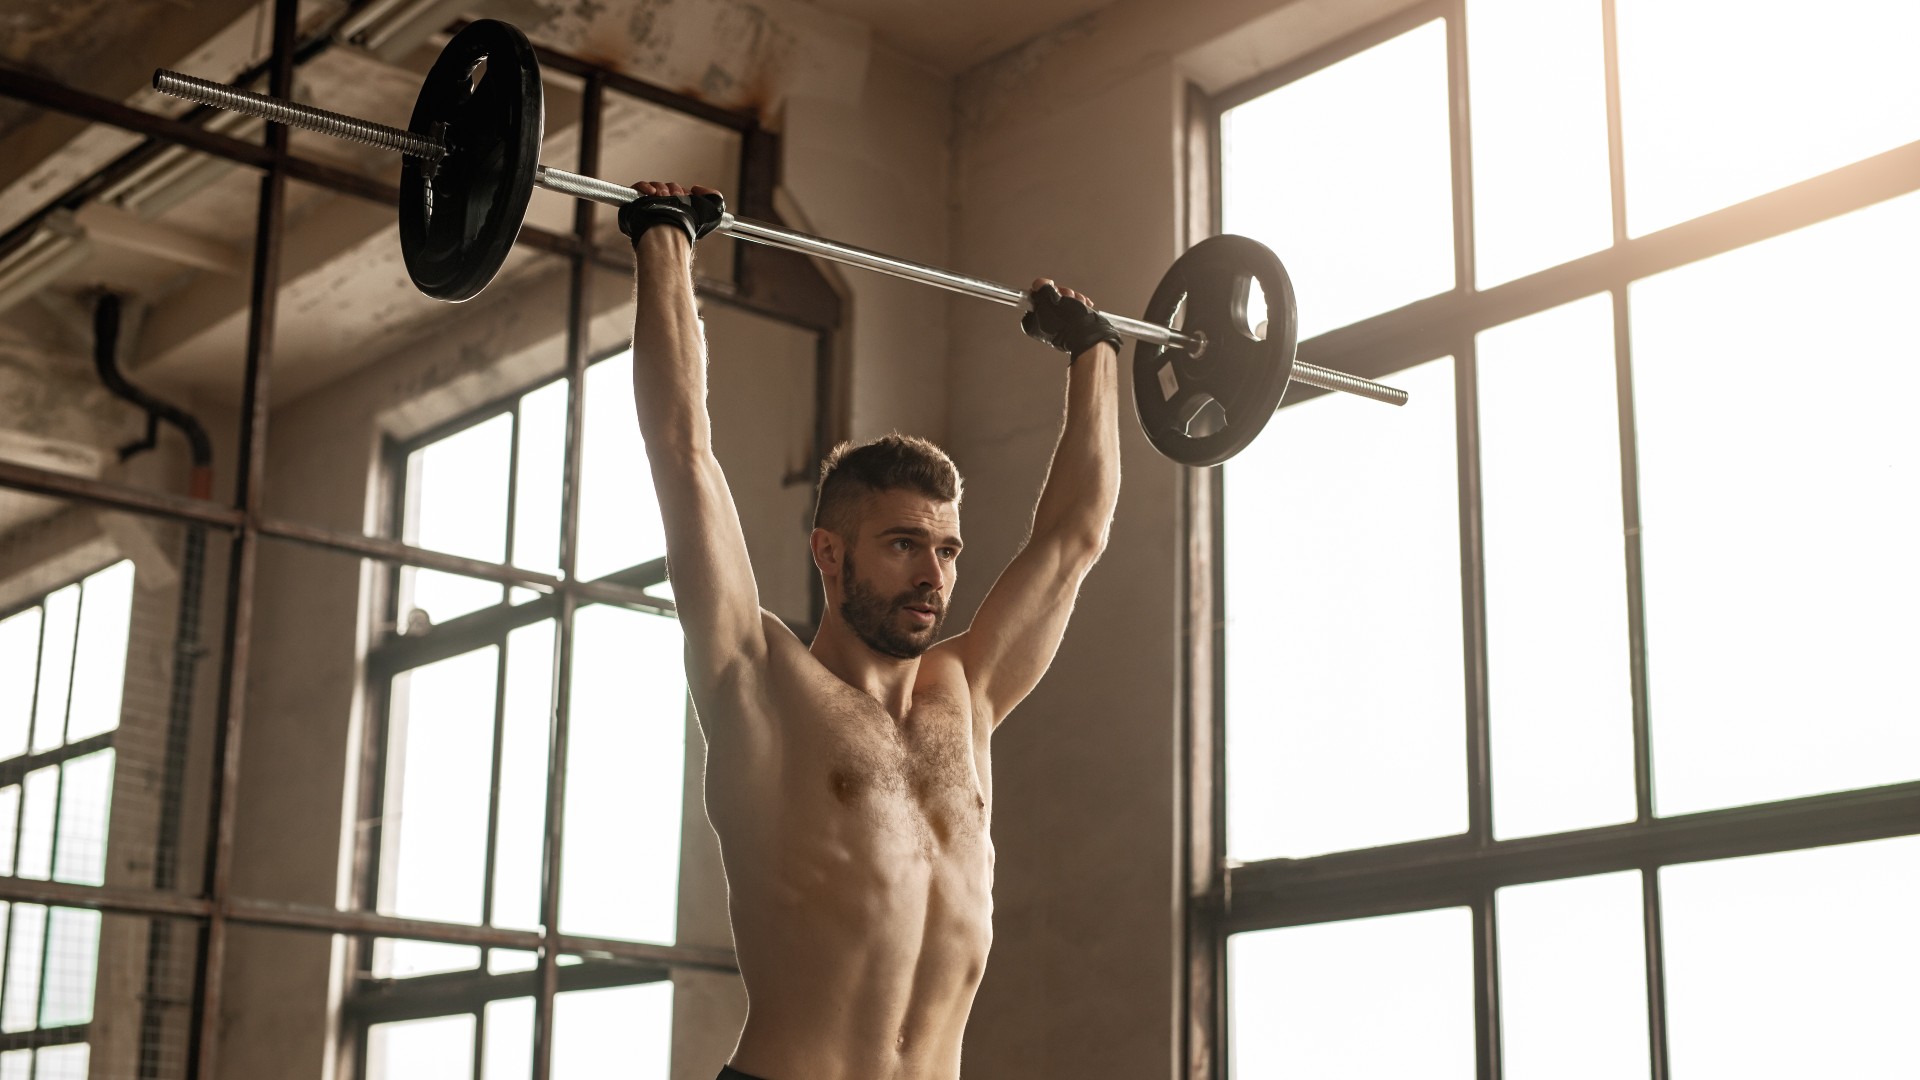 How to overhead press to build upper-body strength and muscle